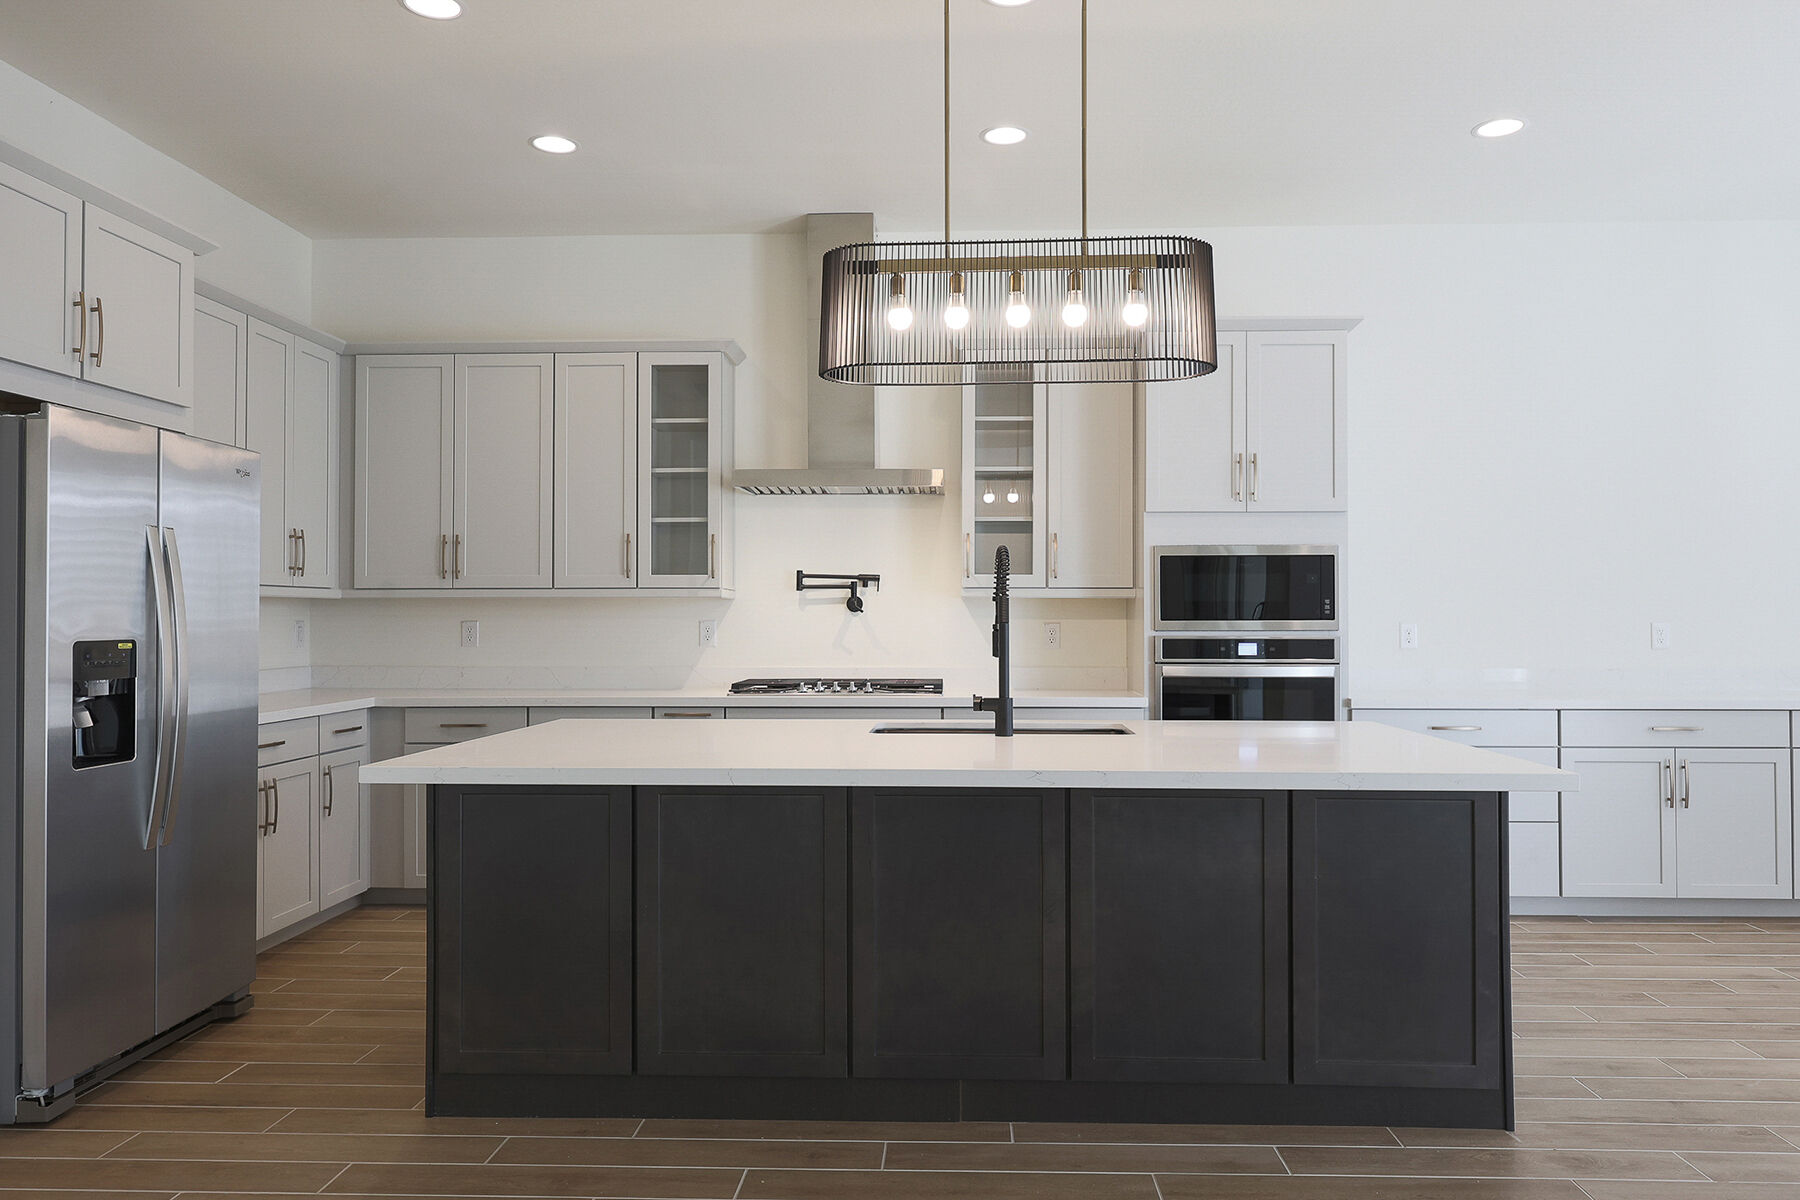 L-Shaped Kitchen with refrigerator, pendant light, cooktop, oven, white cabinets and wood flooring